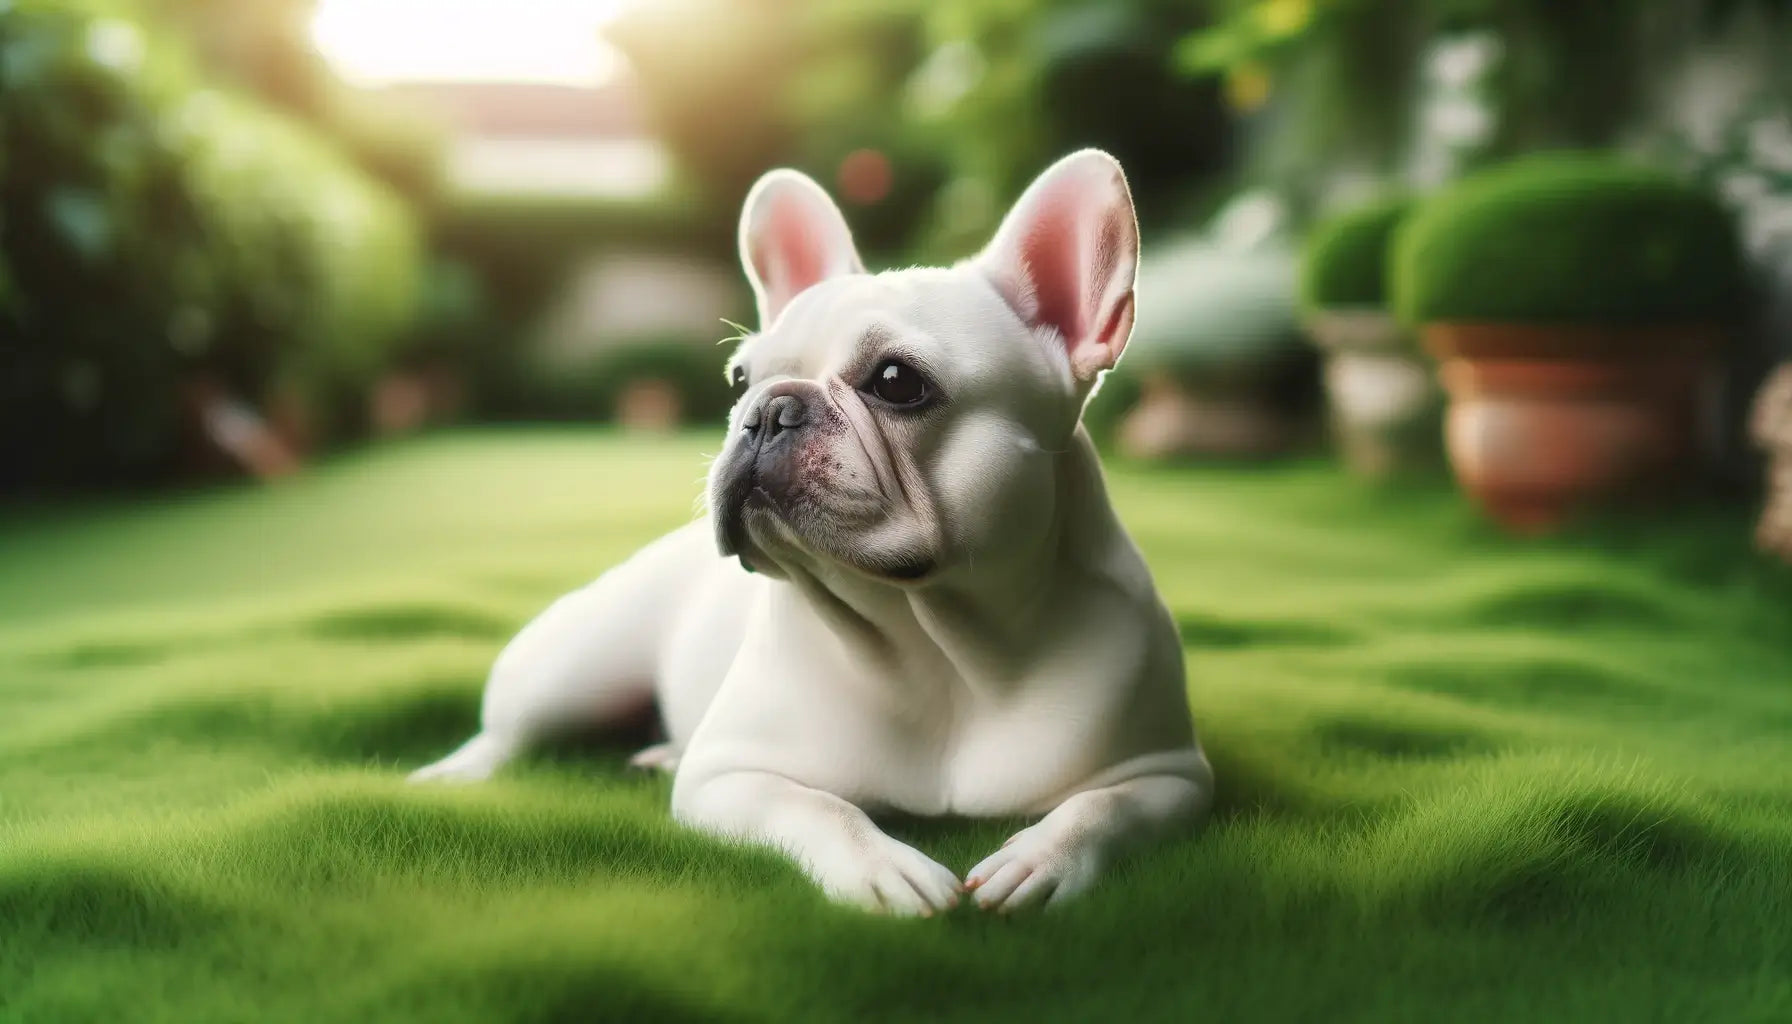 White French Bulldog lying on grass, its gaze directed towards the distance, reflecting a gentle and affectionate nature.